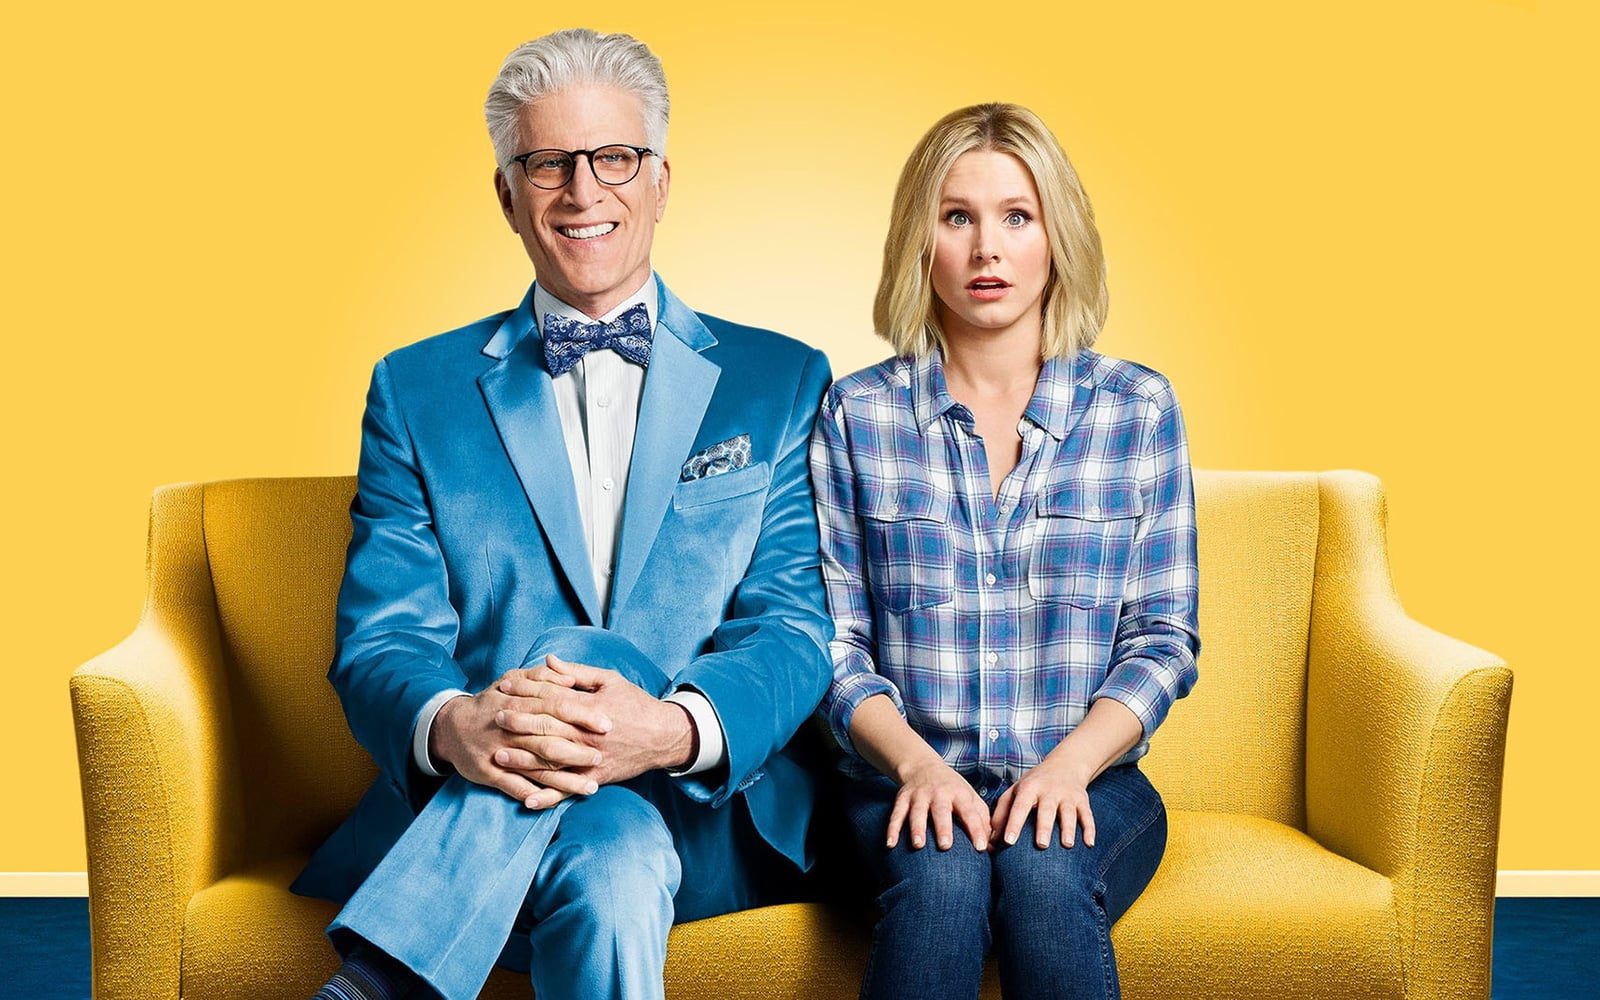 The good place